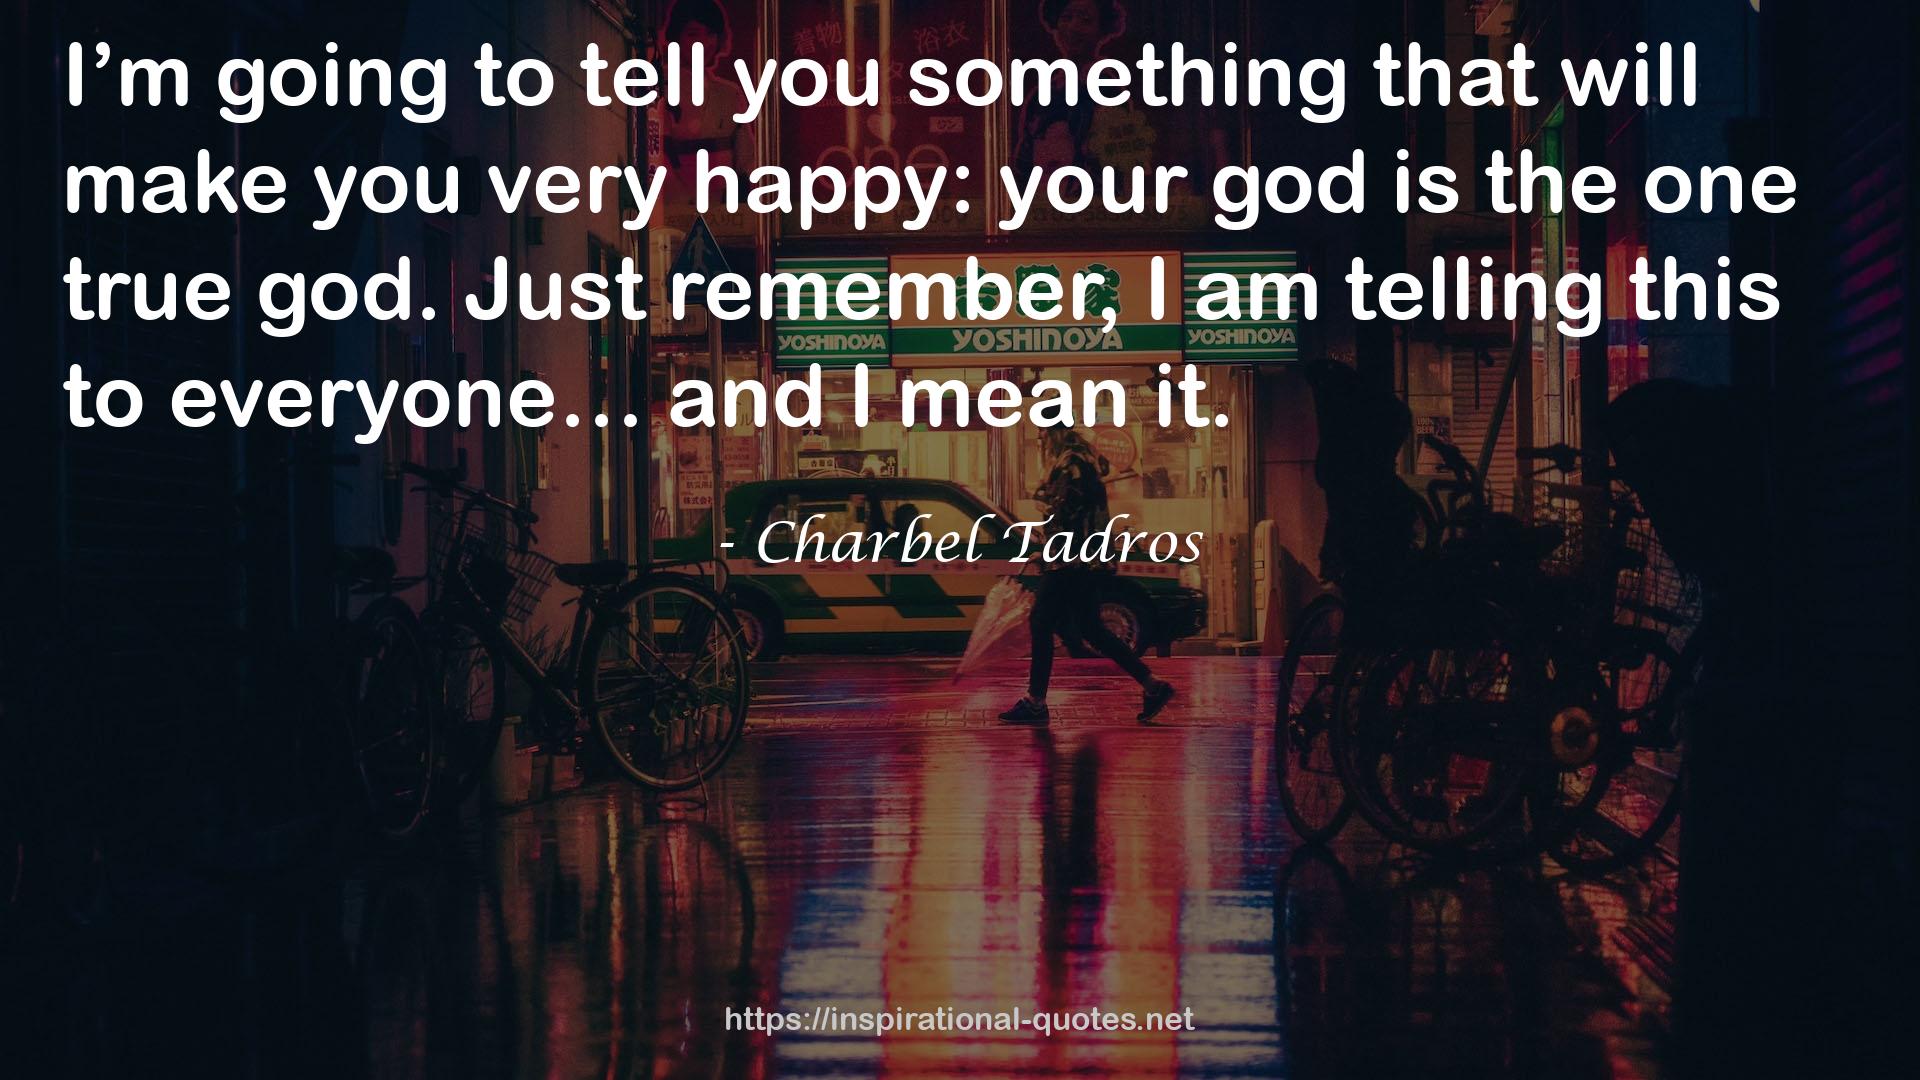 Charbel Tadros QUOTES